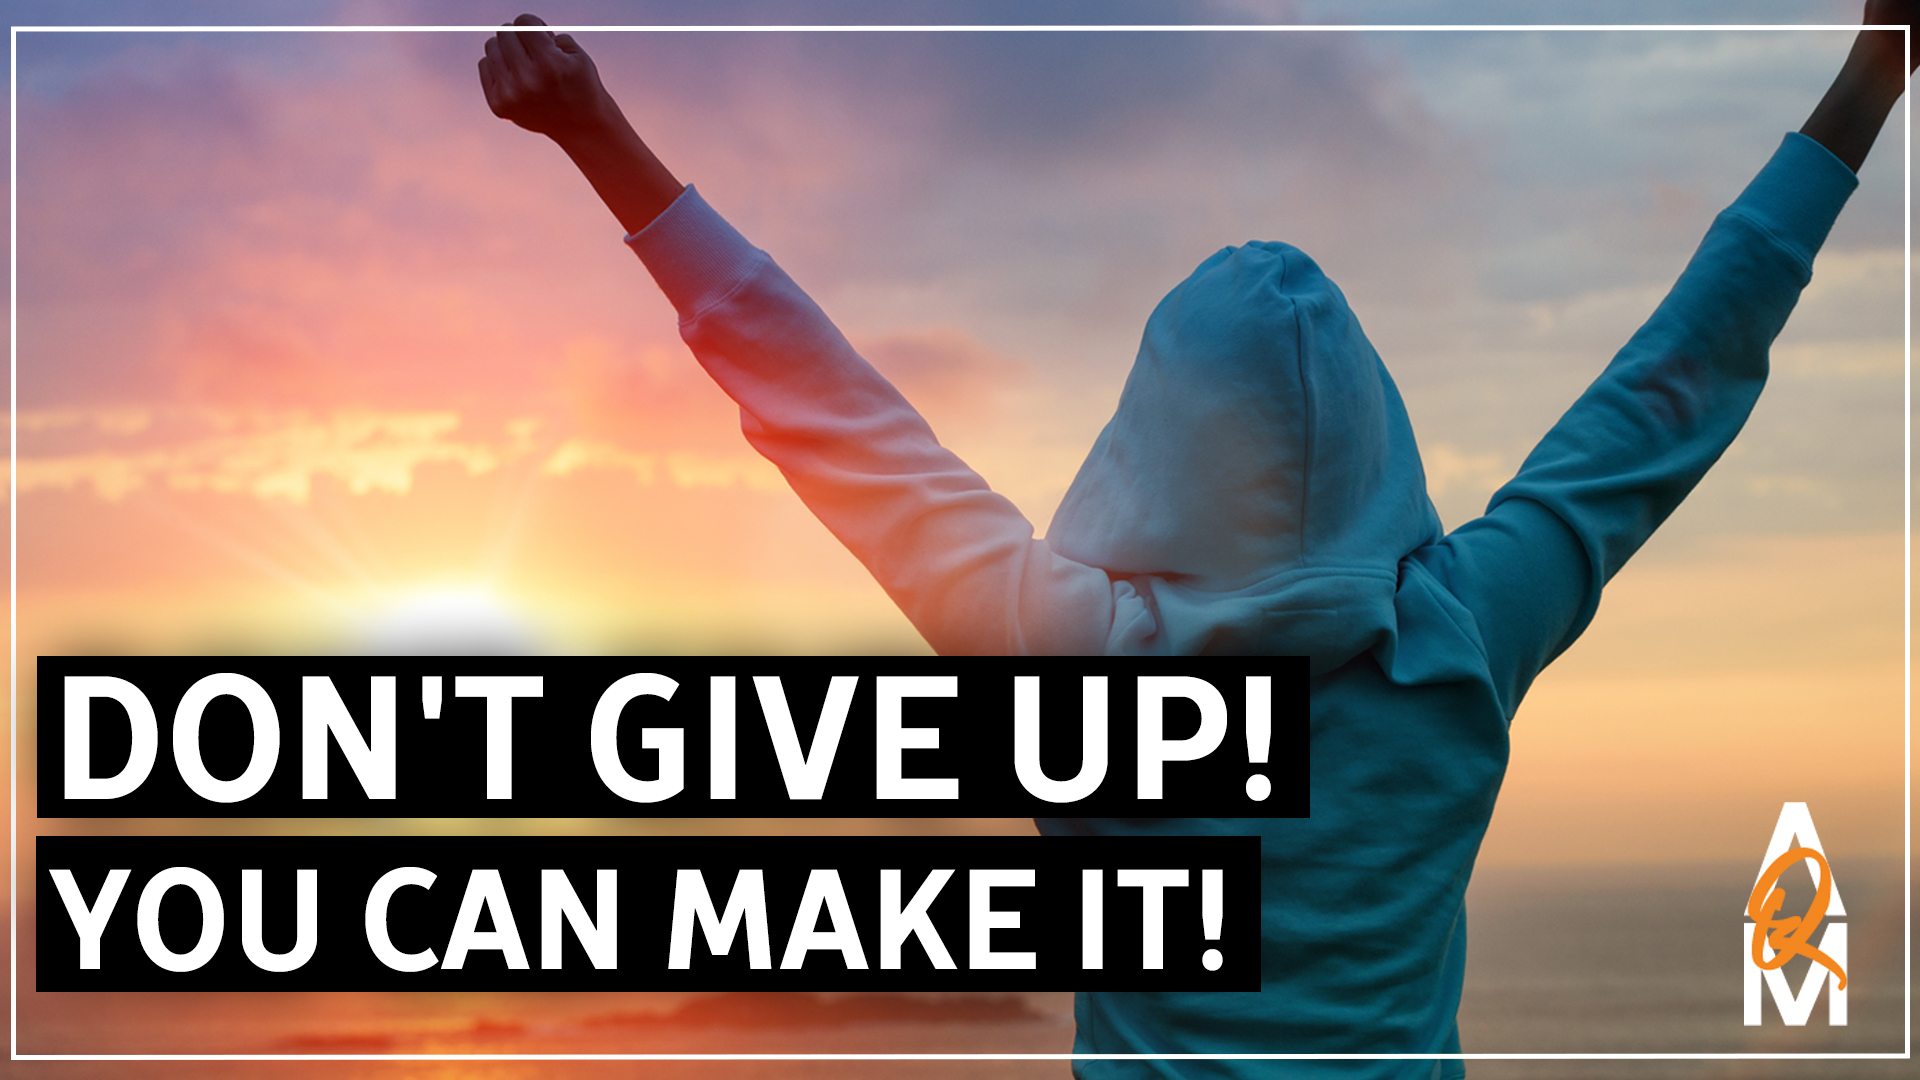 Do Not Give Up. You Can Make It Through!